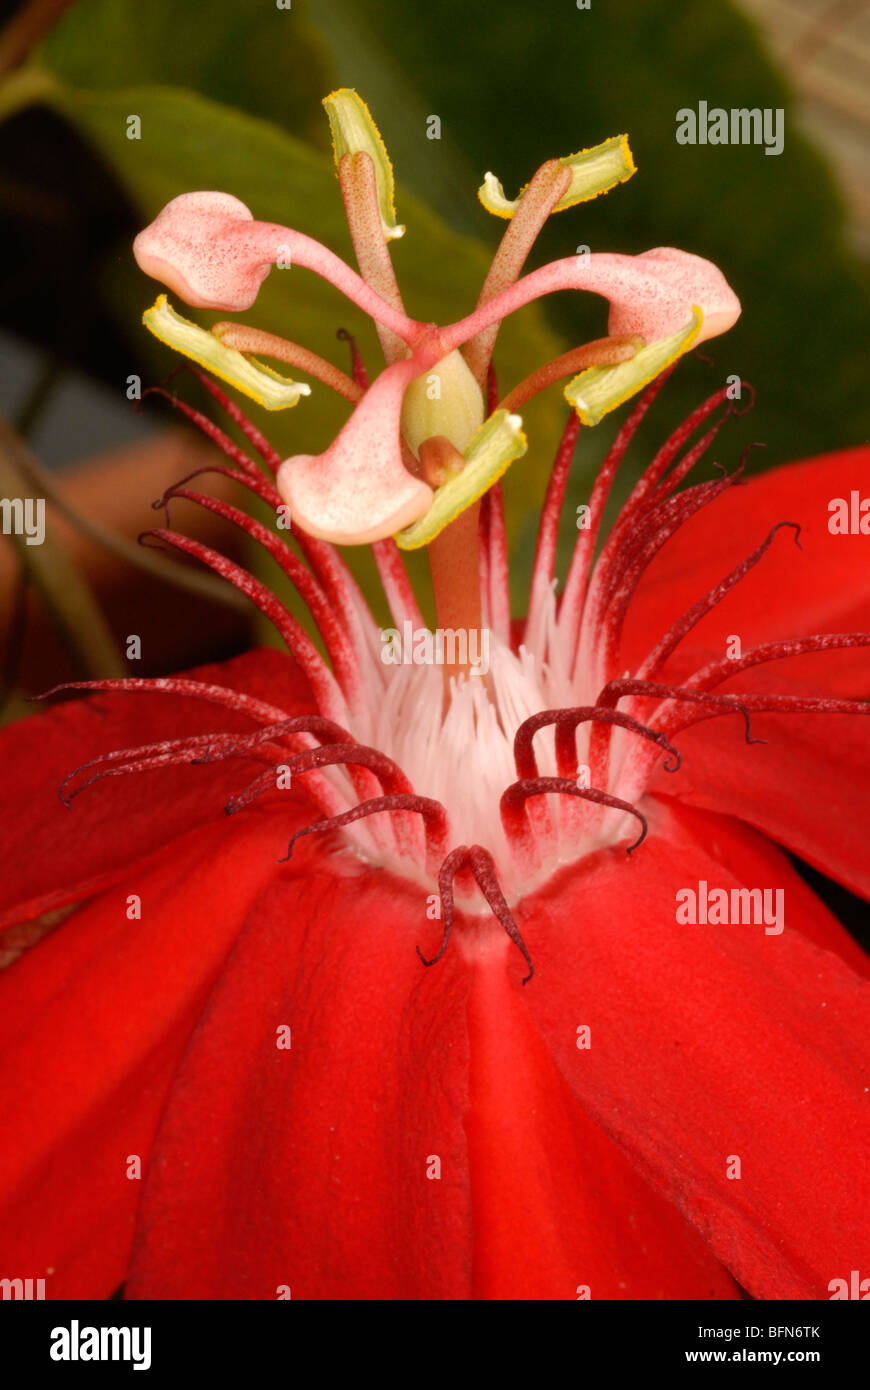 Passiflora 'Amanda Joy' blossom. The passion flowers or passion vines are a genus of about 500 species of flowering plants. Stock Photo